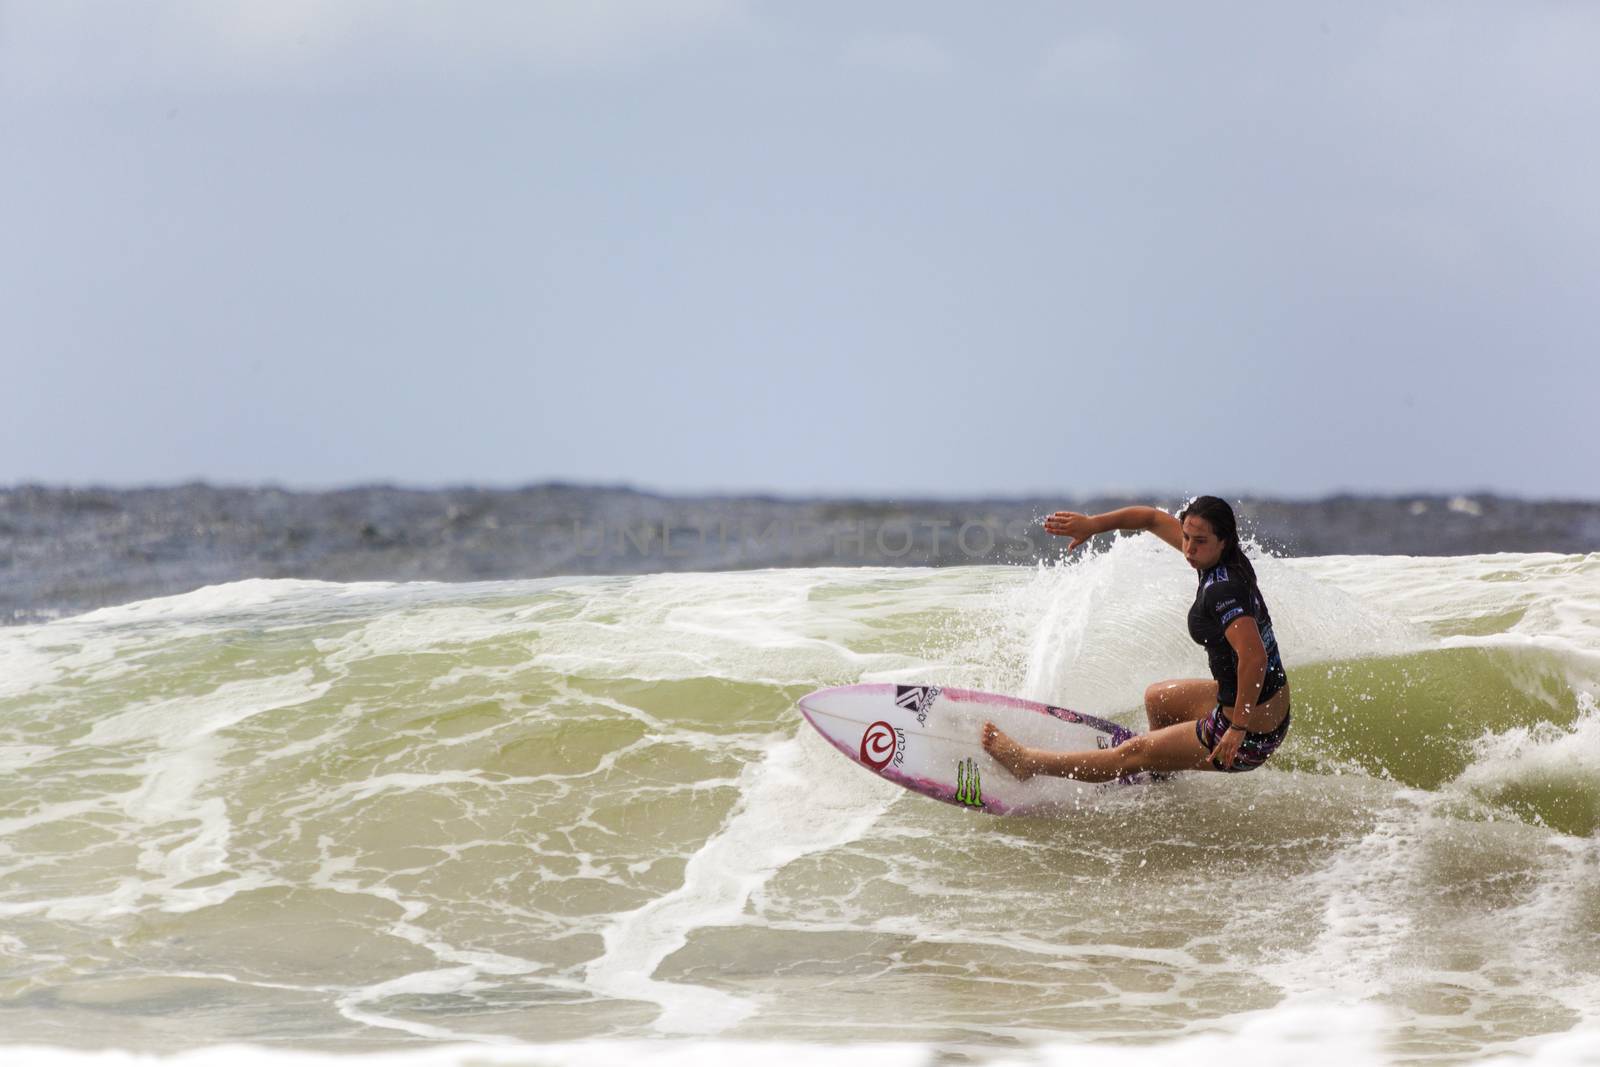 Surfer At A Competition by Imagecom